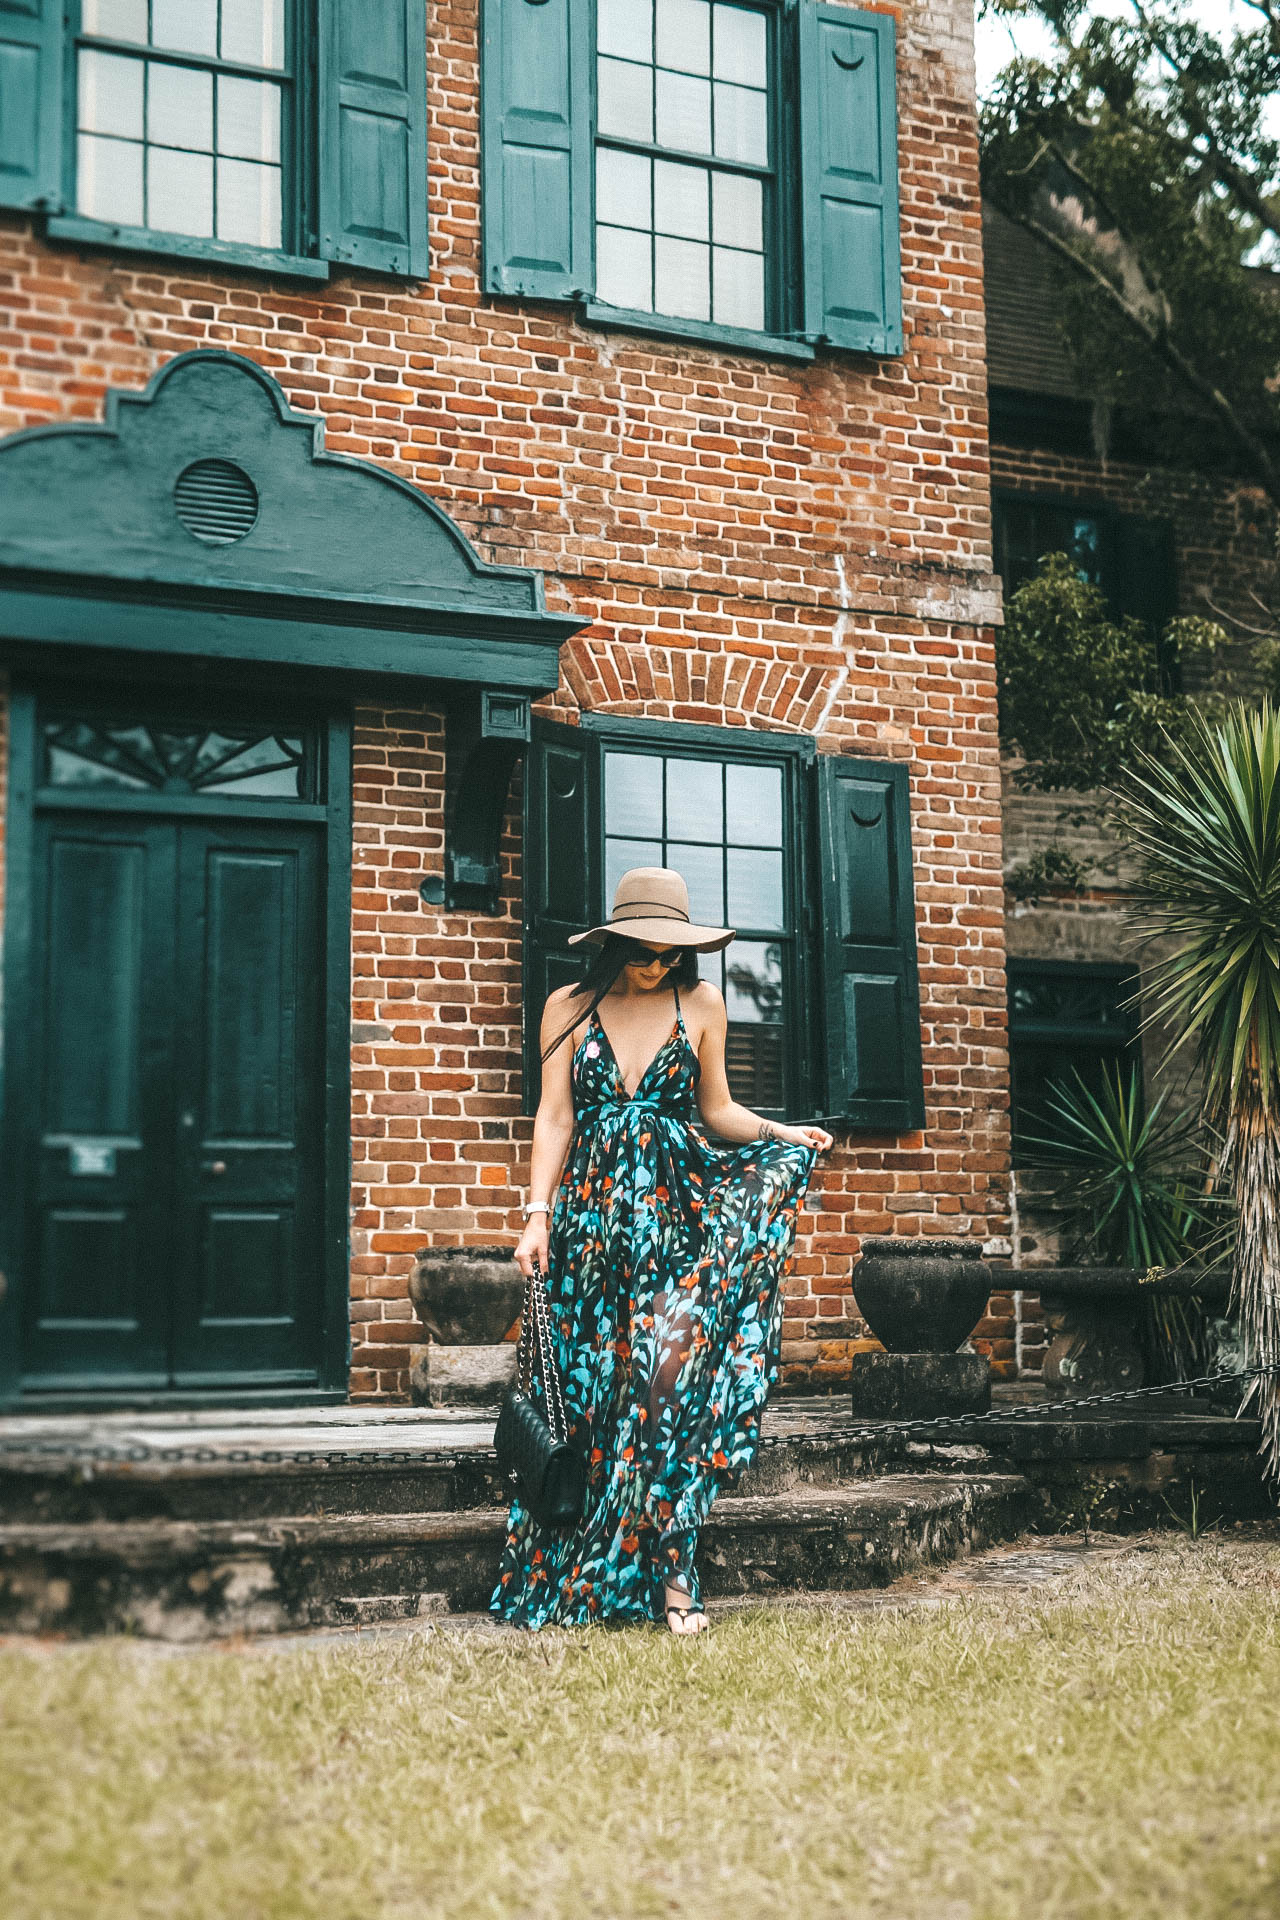 #Charleston #CharlestonSC #CharlestonVacation #volvocars #NewS60 #Middletonplace #southernplantation #helicoptertour #rainbowrow #thedewberry | Volvo | A Weekend in Charleston: the Best Things to Do featured by top Austin travel blogger Dressed to Kill